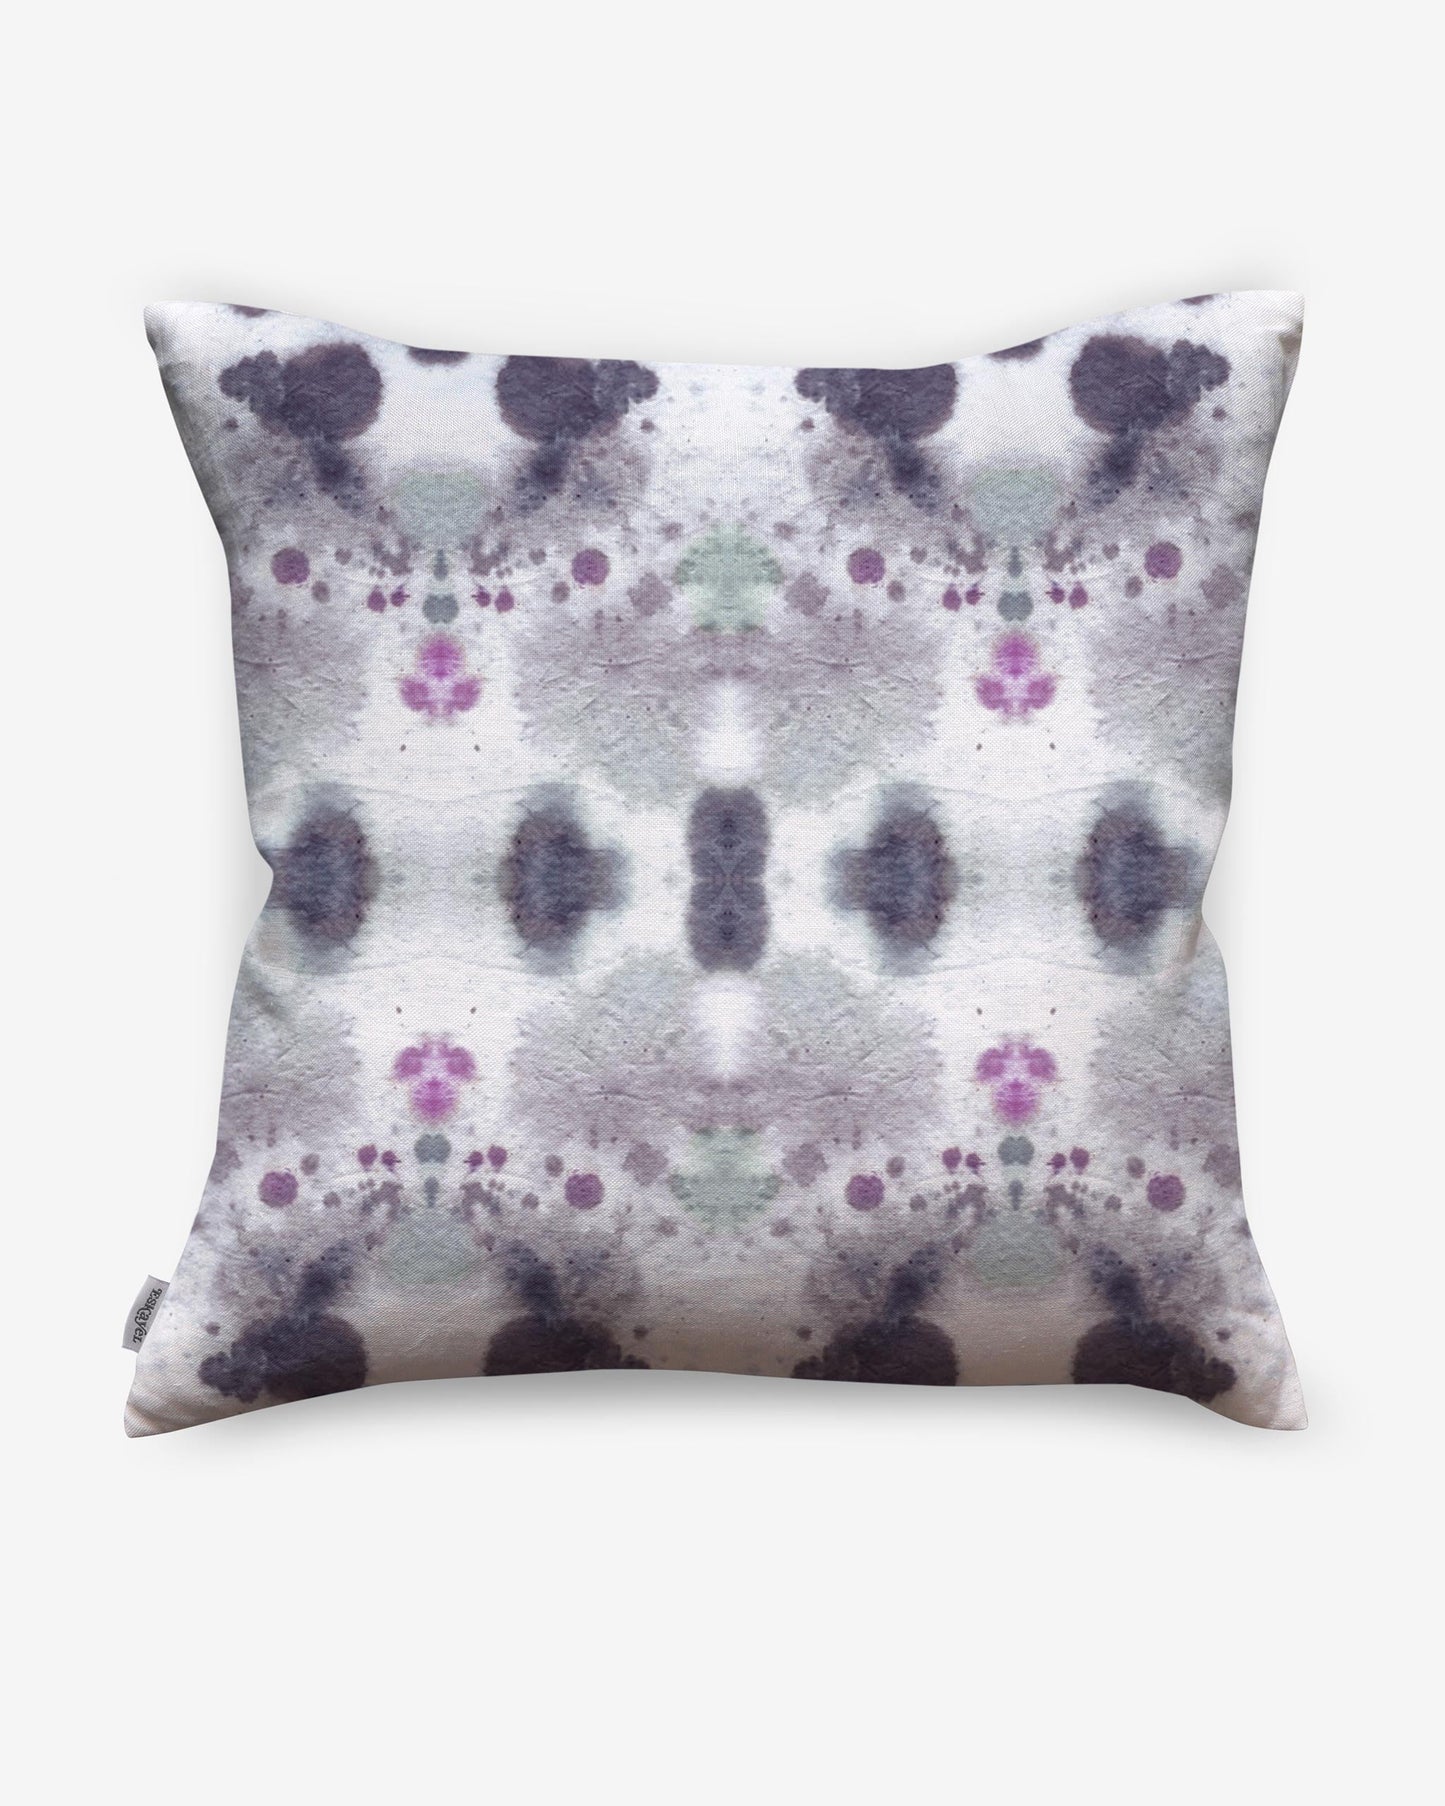 A Species Pillow Indigo with purple and green flowers on it creates a kaleidoscopic effect